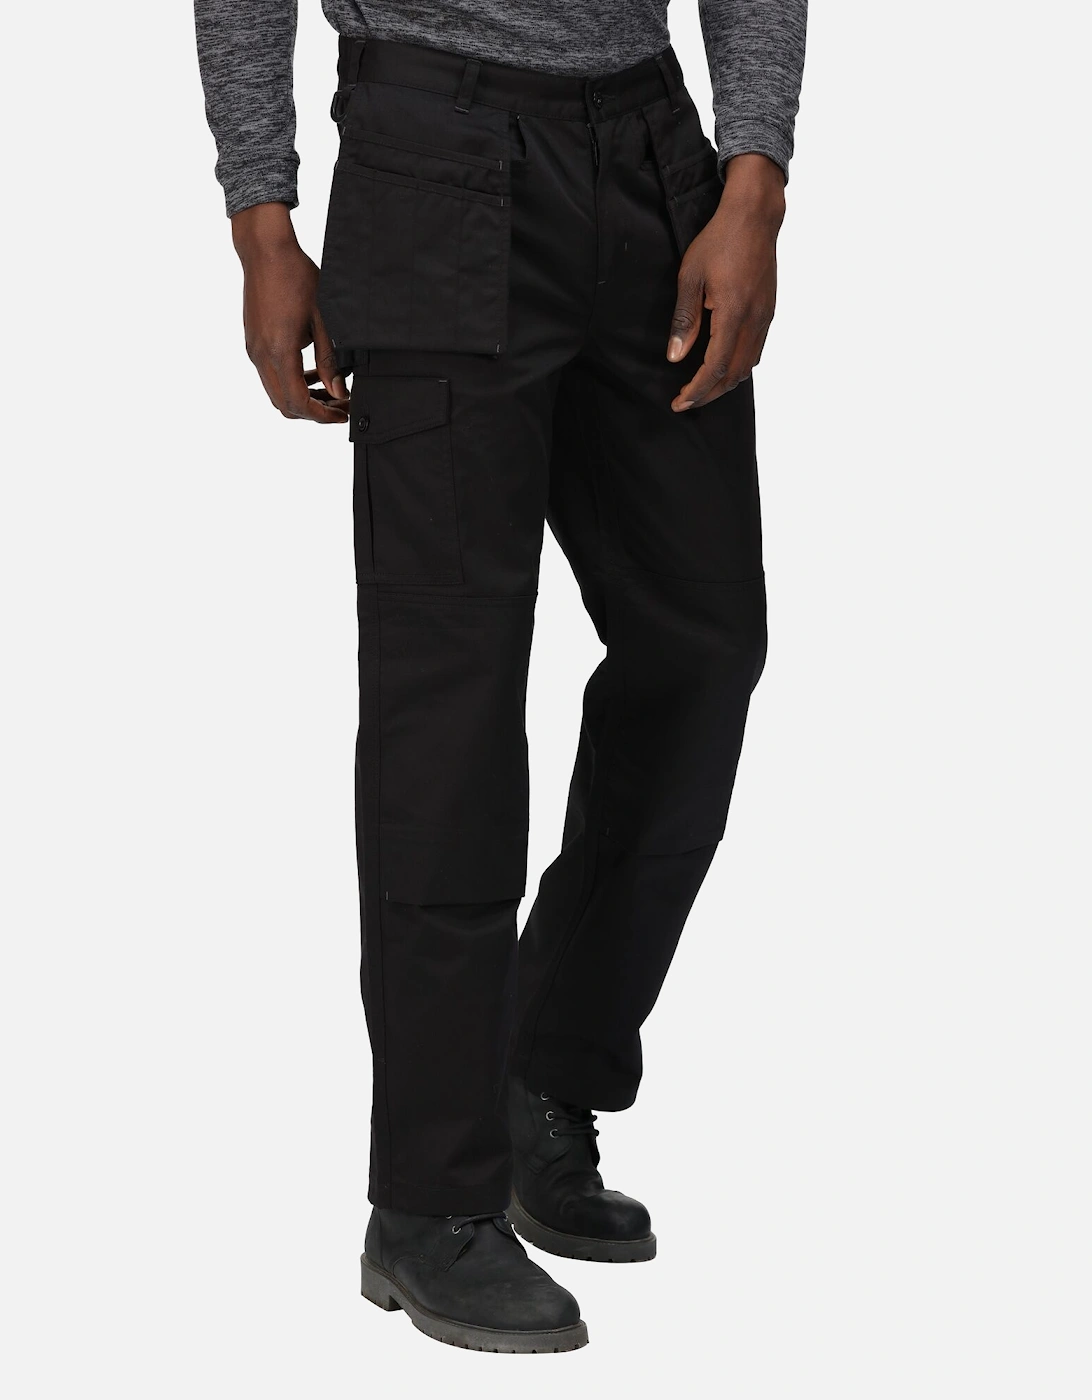 Mens Pro Cargo Trousers